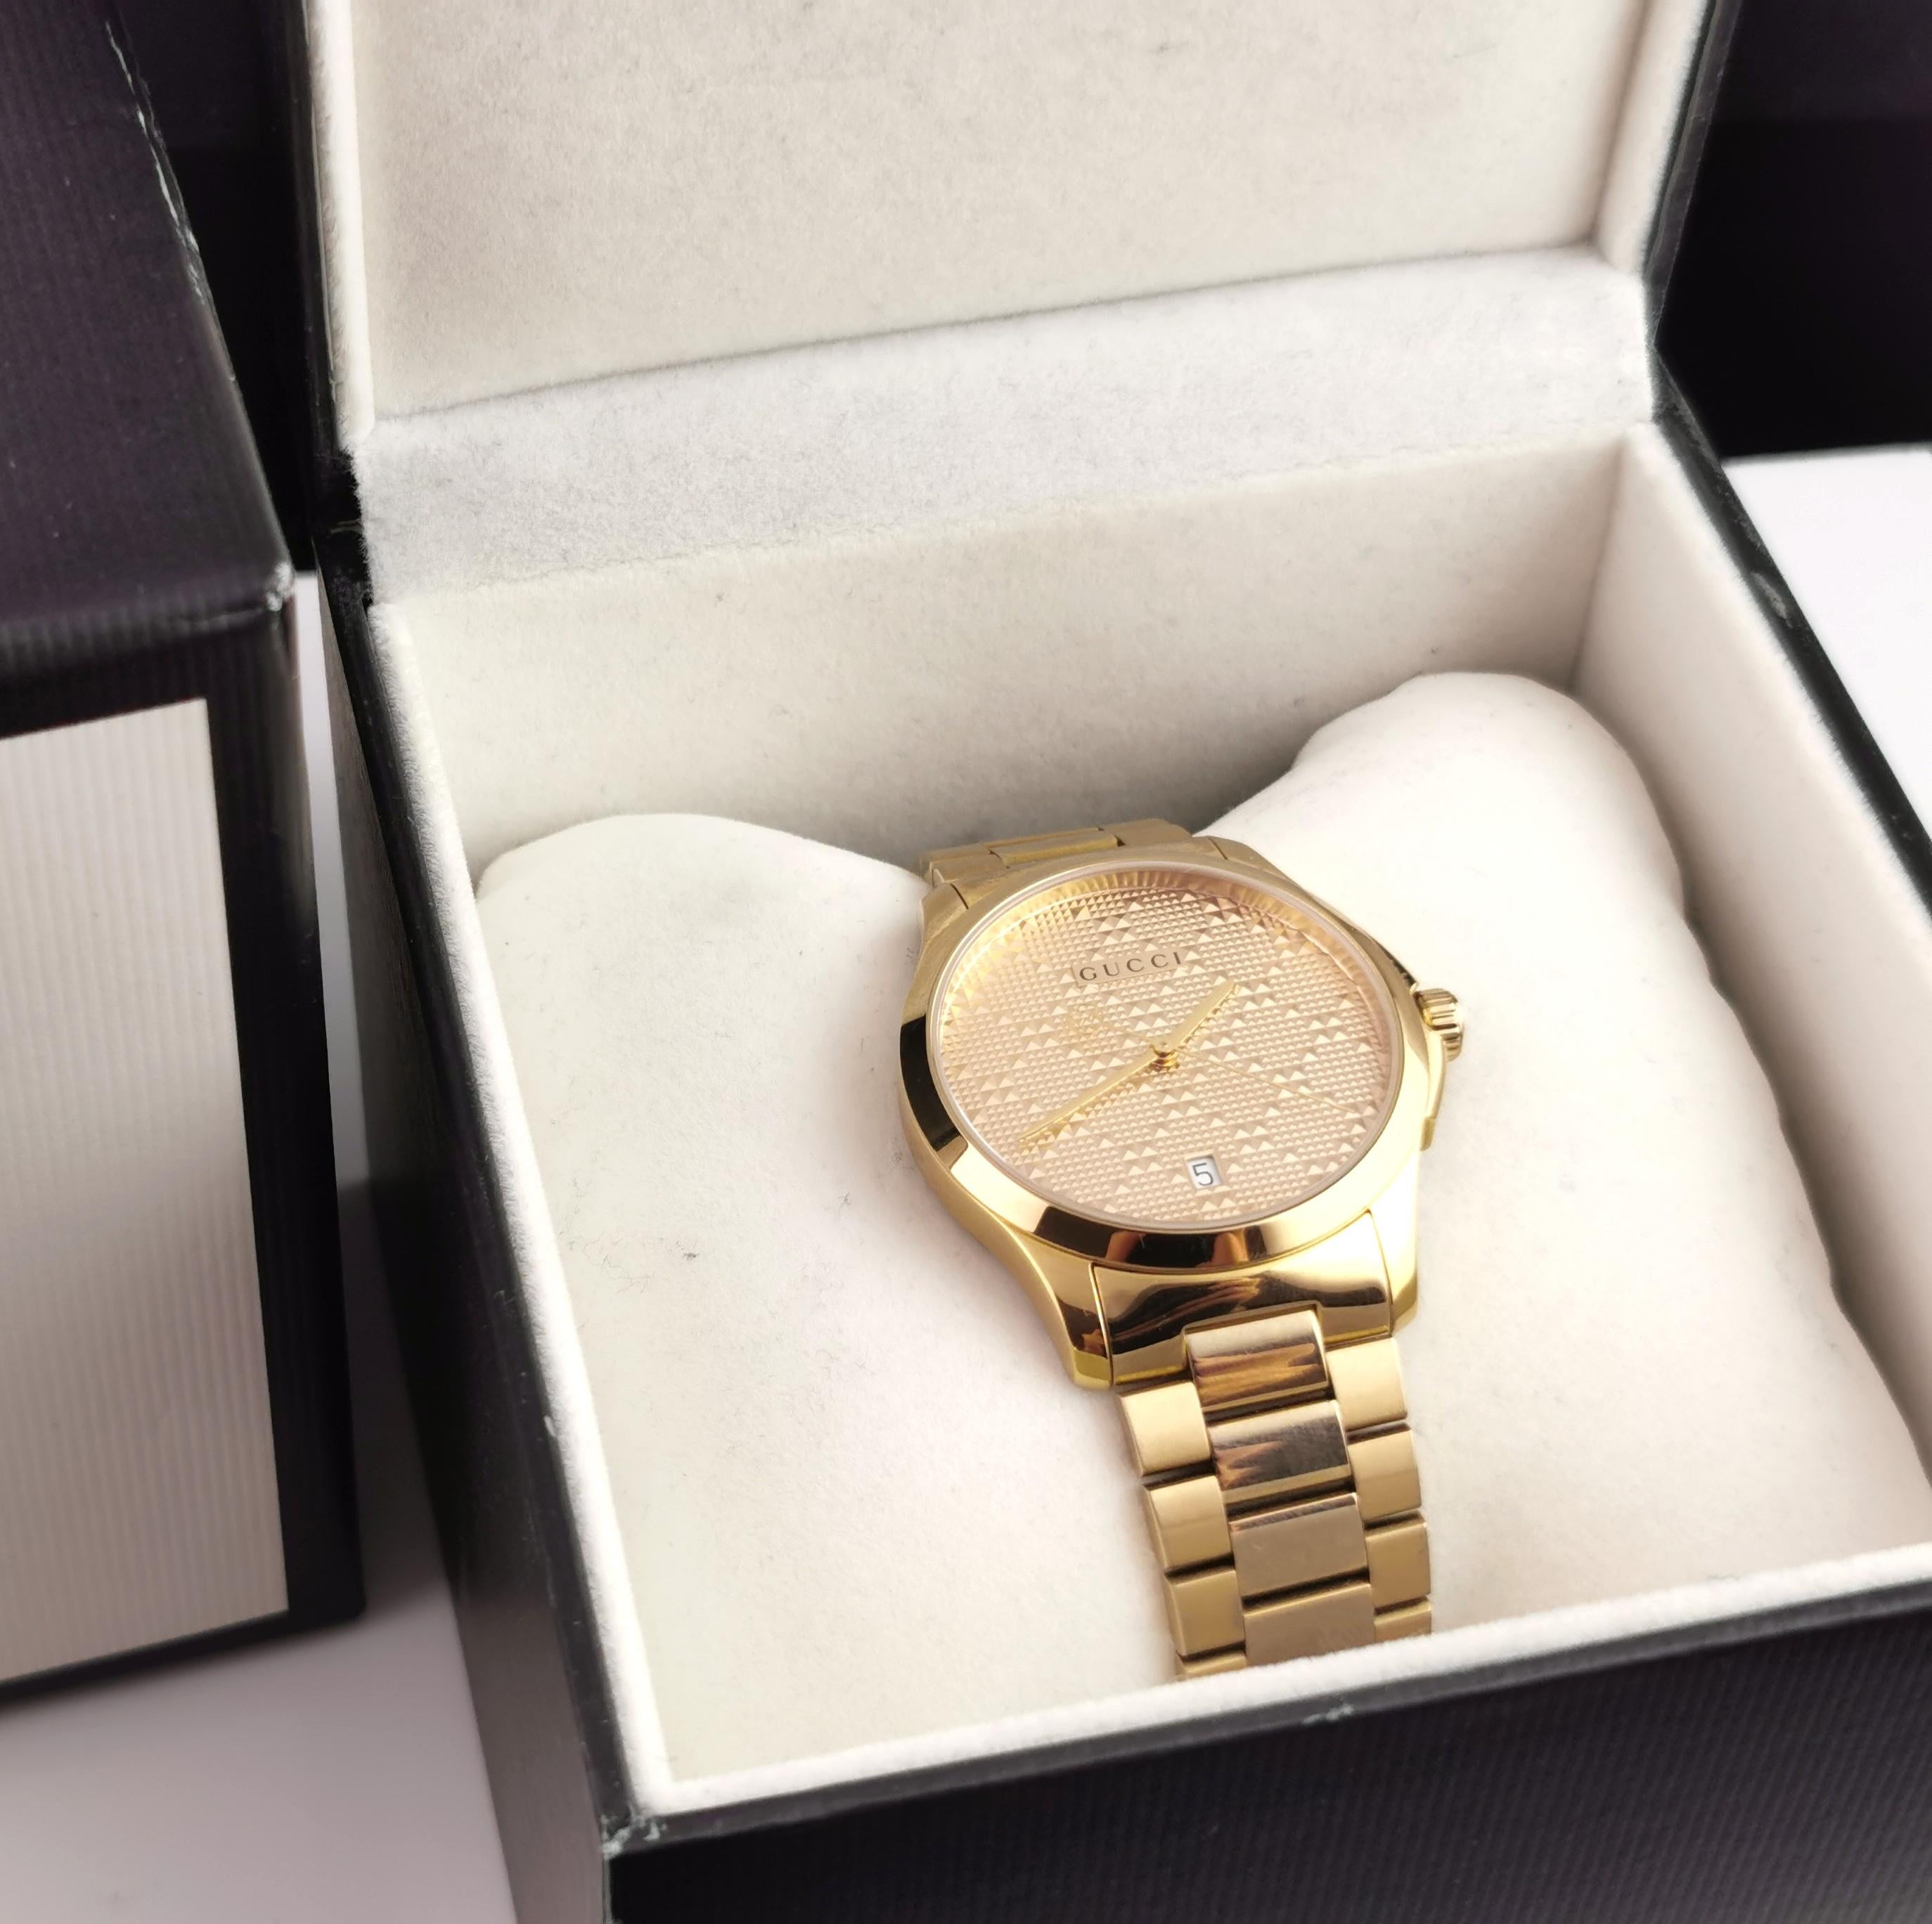 gucci 126.4 men's watch price